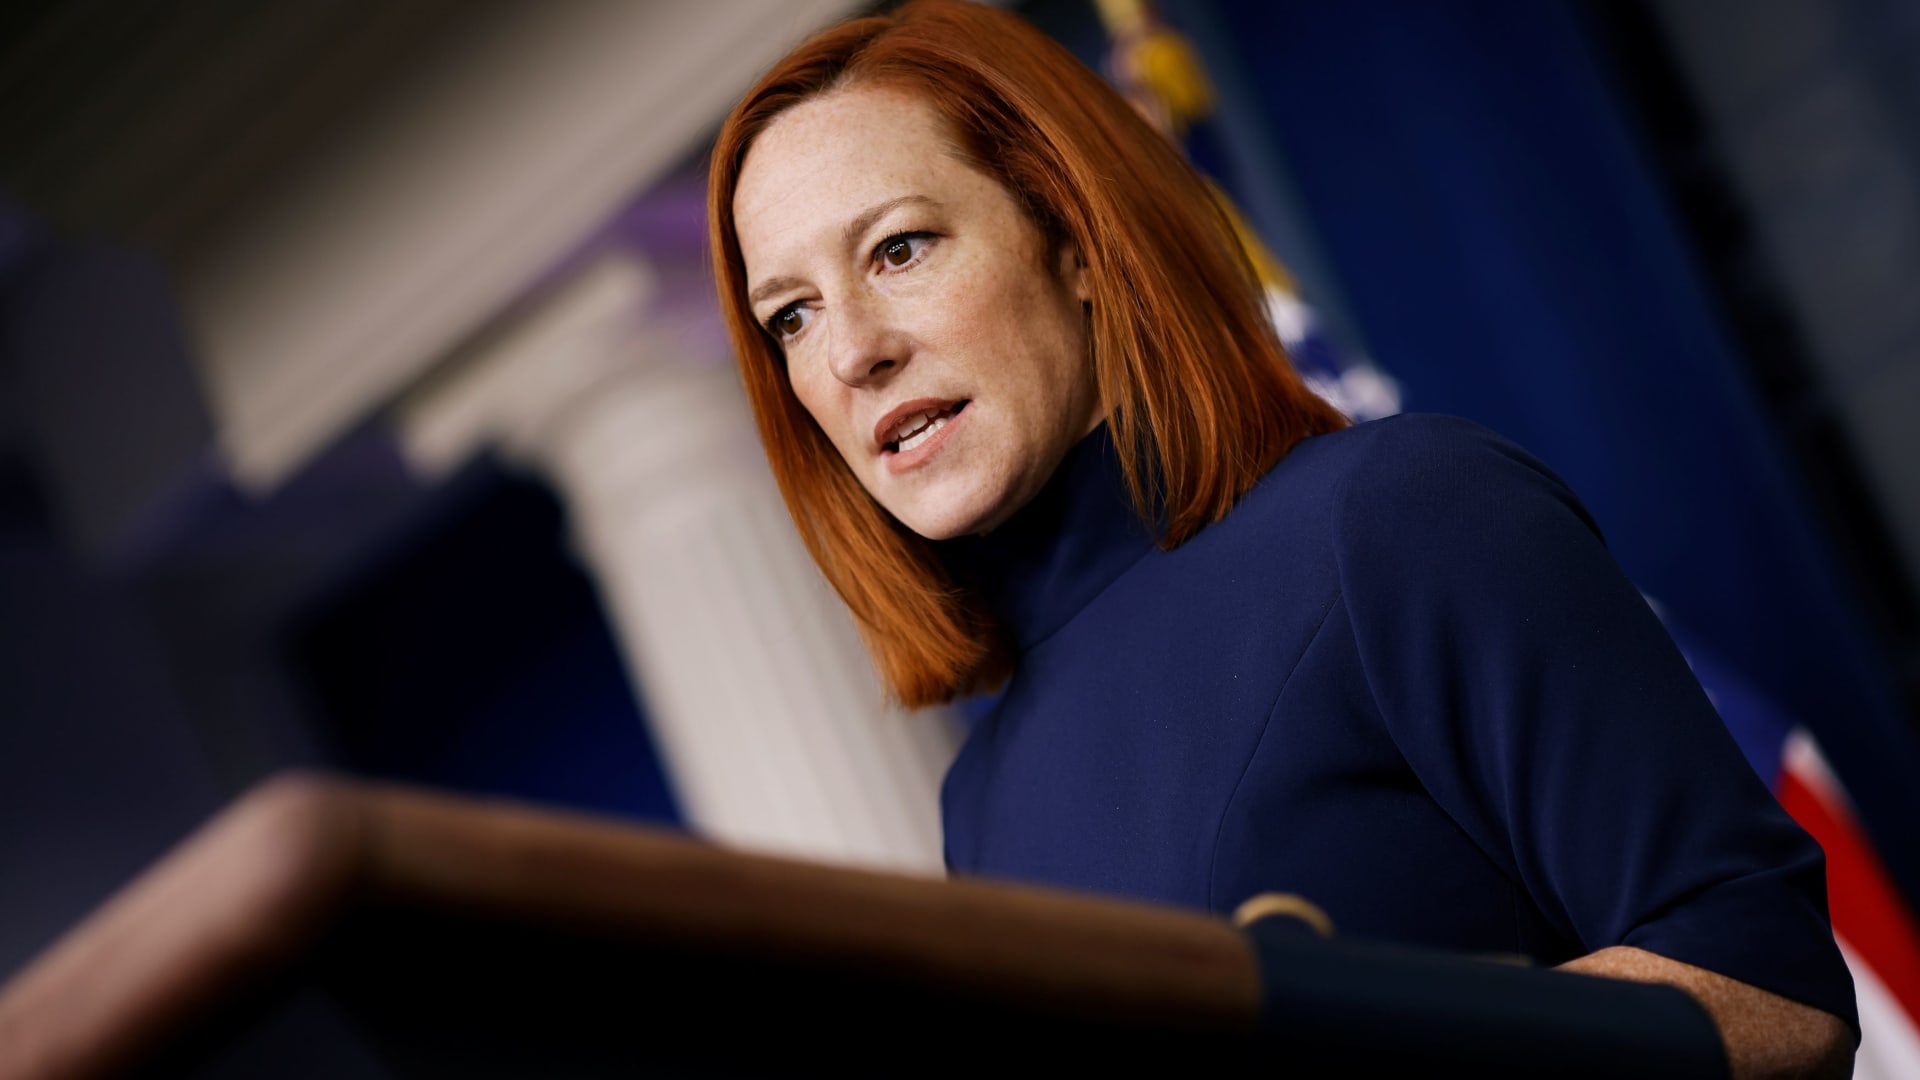 White House Press Secretary Jen Psaki delivers remarks during a press briefing at the White House in Washington, February 8, 2021.